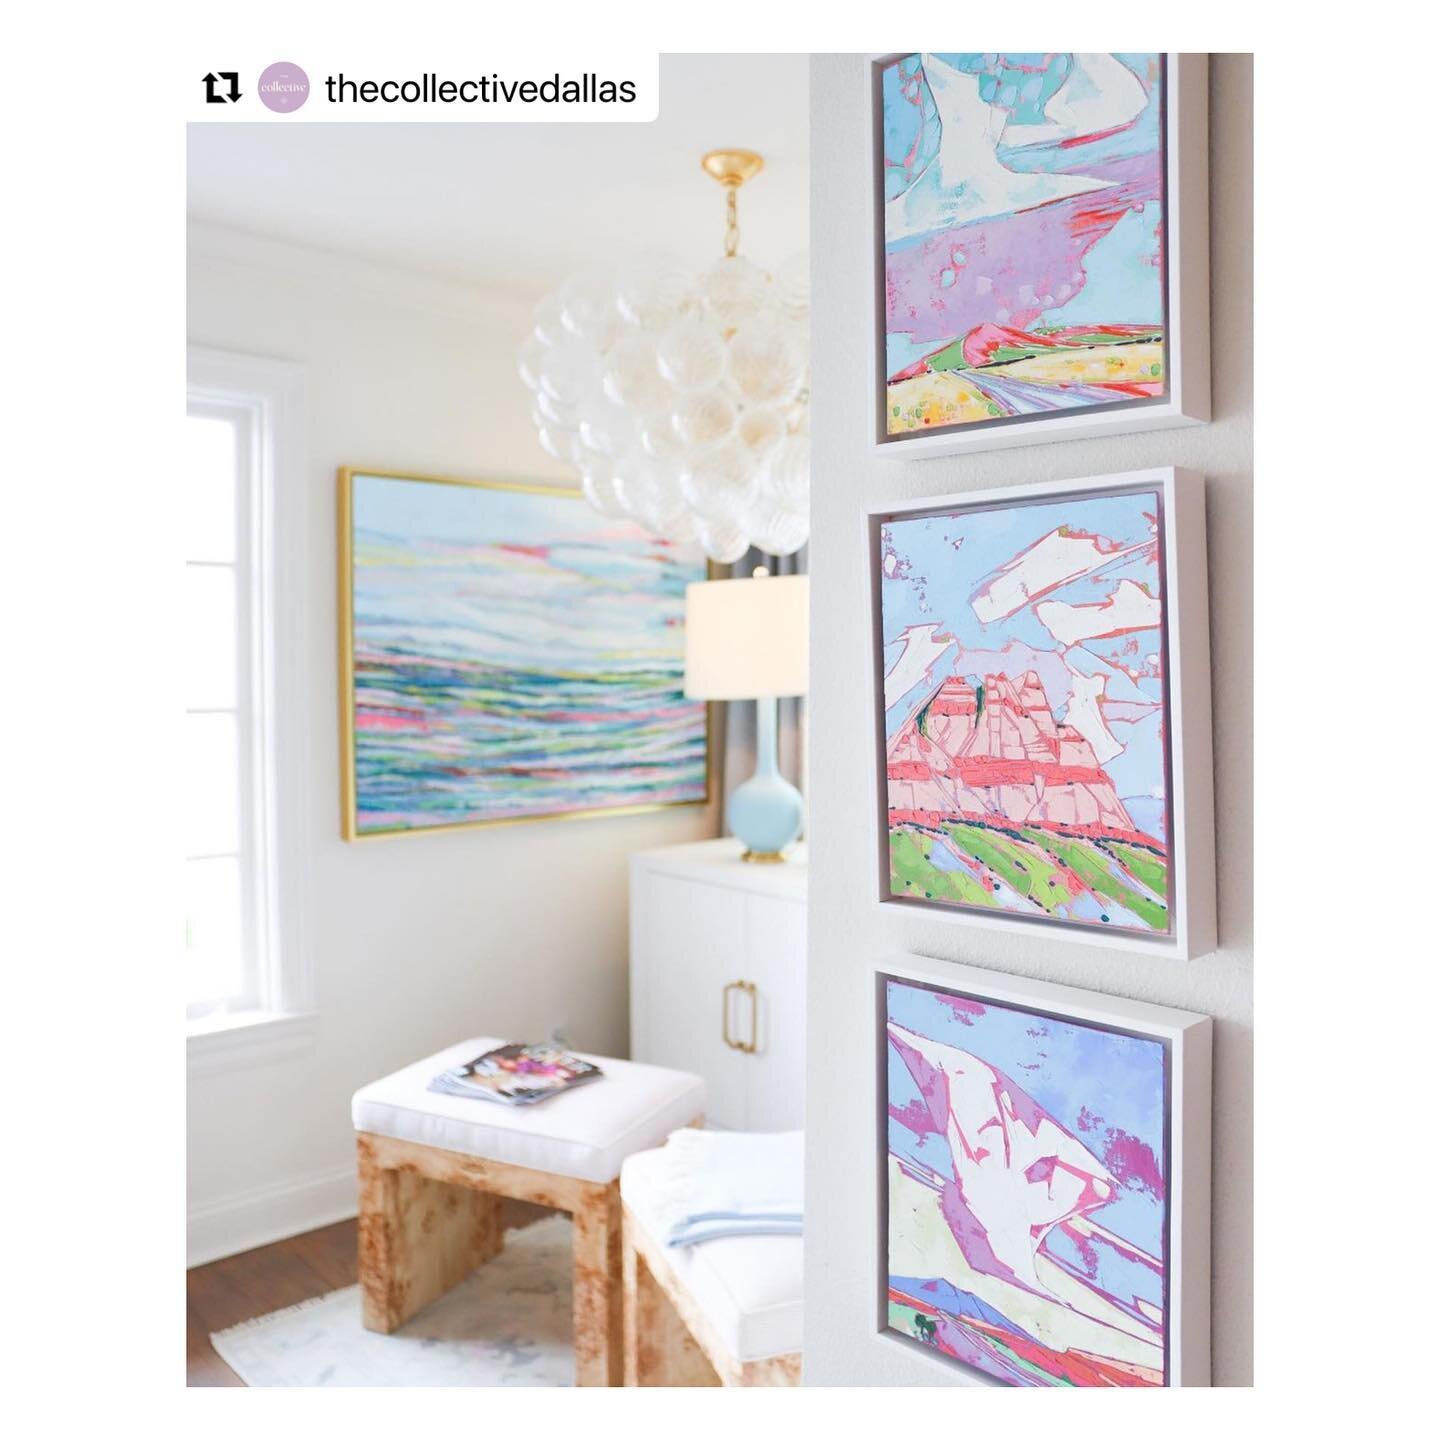 Yes!!!!
🌸🌸🌸🌸🌸

#Repost @thecollectivedallas with @use.repost
・・・
⁠&quot;Color Punch&quot; group art feature releasing May 17⁠
⁠
We are thrilled for the fun colors of summer to grace our walls before they find their new homes. Comment &quot;PREVI